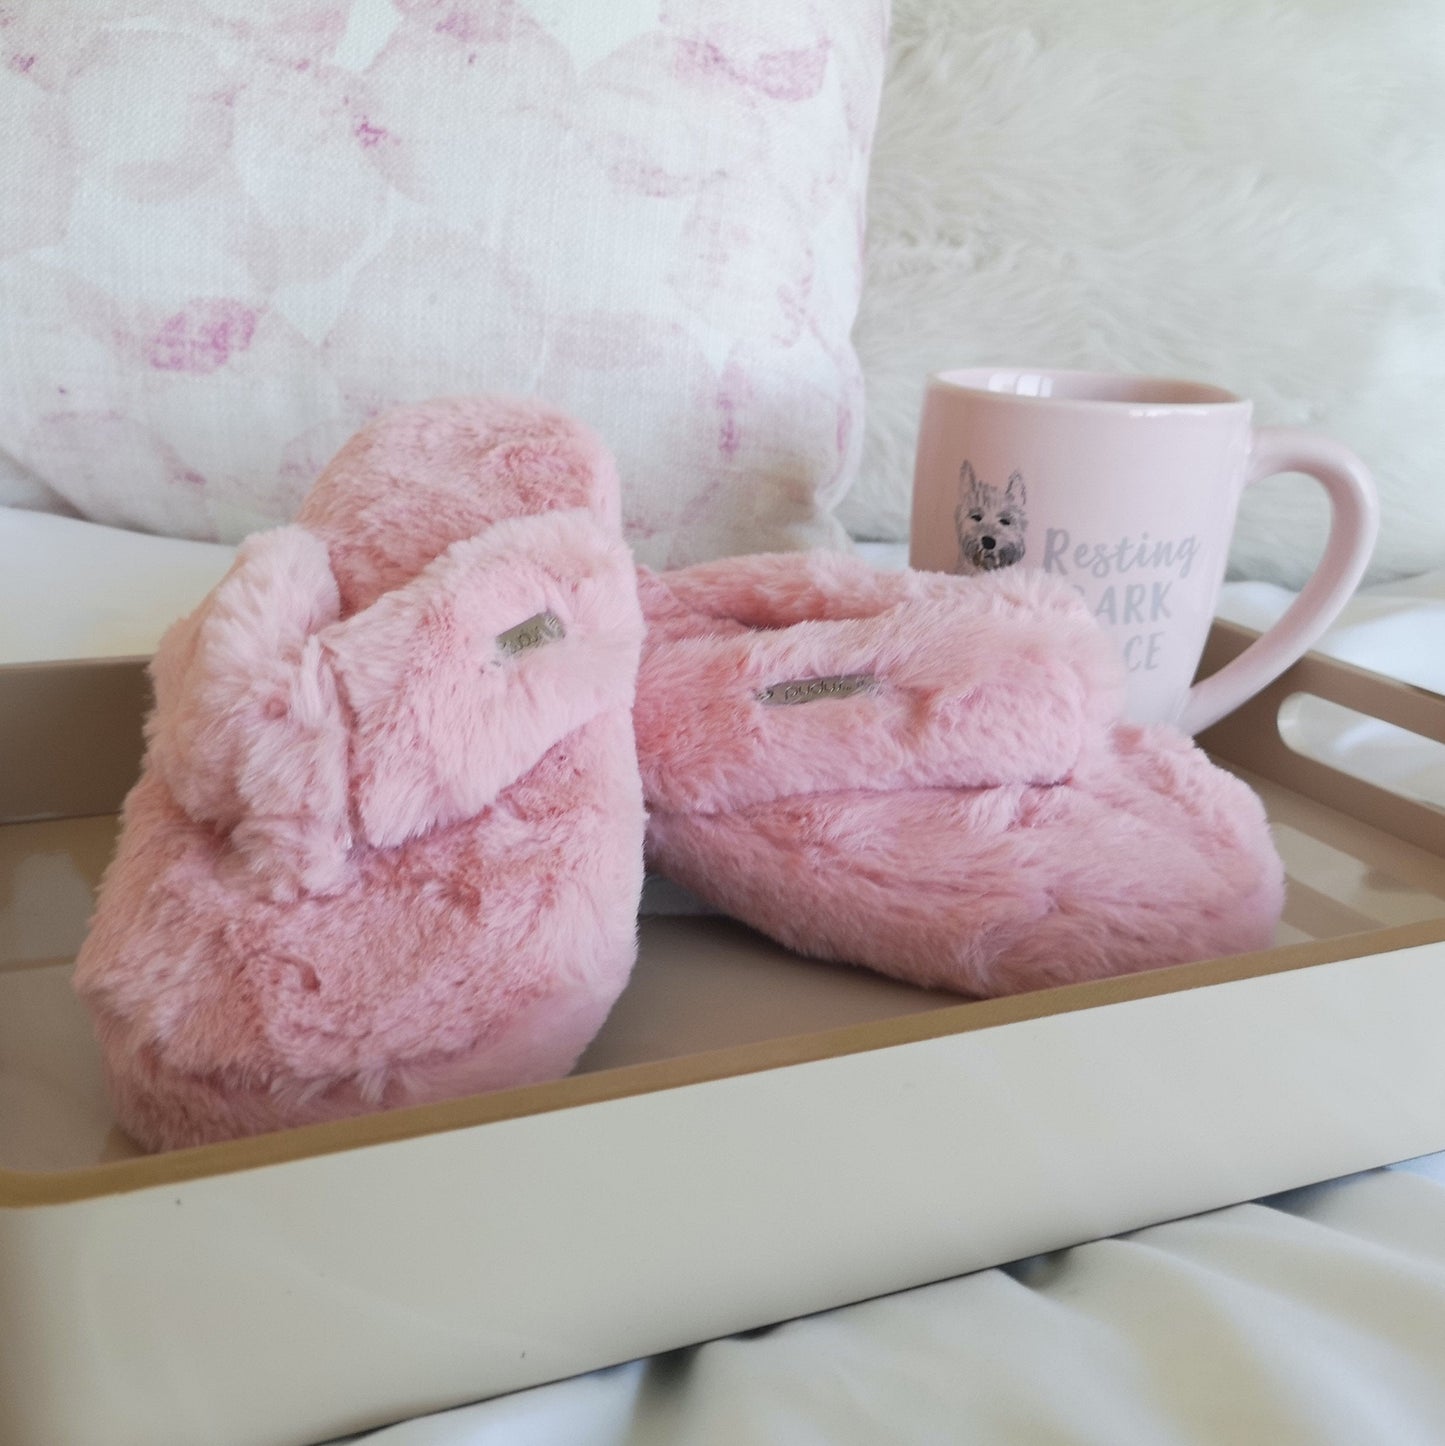 Blush Pink Cottontail Flip Flop Slippers - Memory Foam Slippers for Women with Soft  Faux Fur Lining 